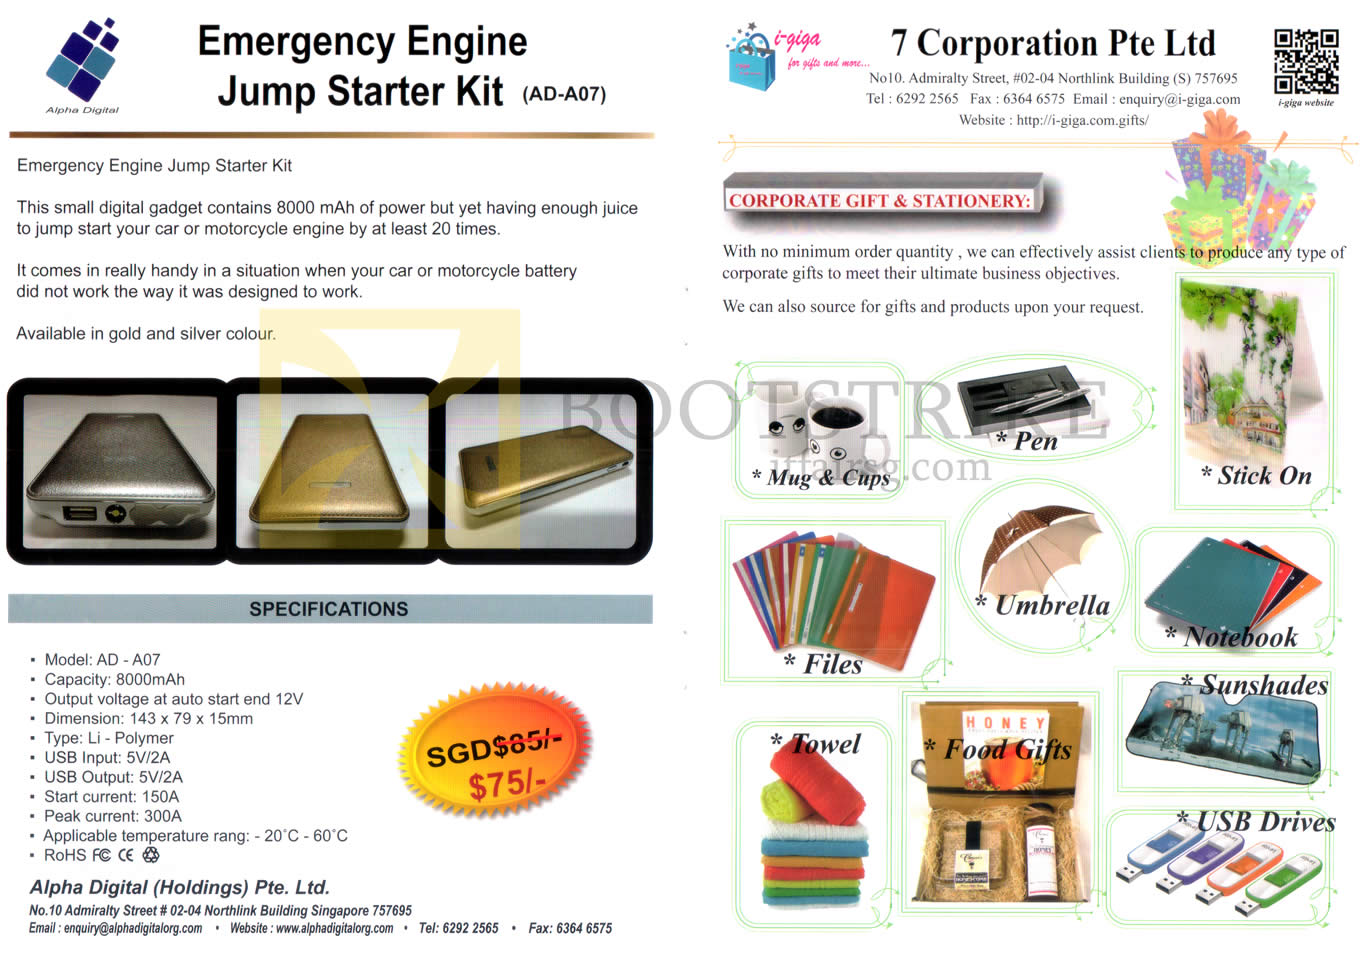 IT SHOW 2016 price list image brochure of Alpha Digital Emergency Engine Jump Starter Kit AD-A07, 7 Corporation Corporate Gifts